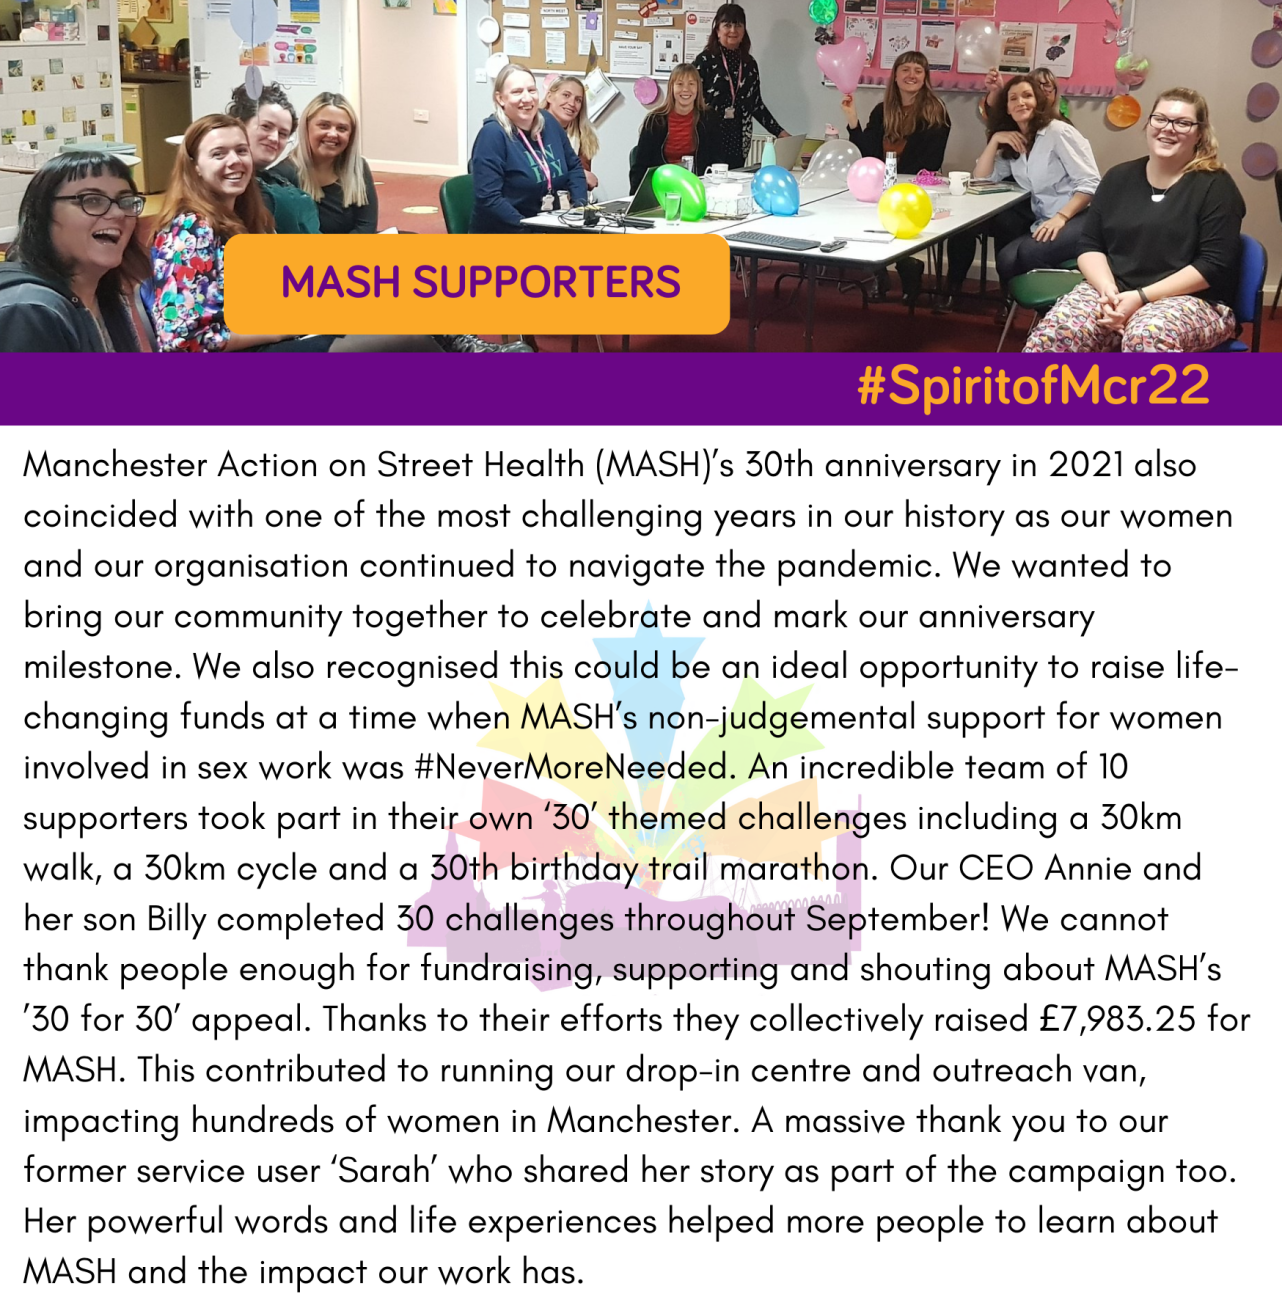 MASH supporters